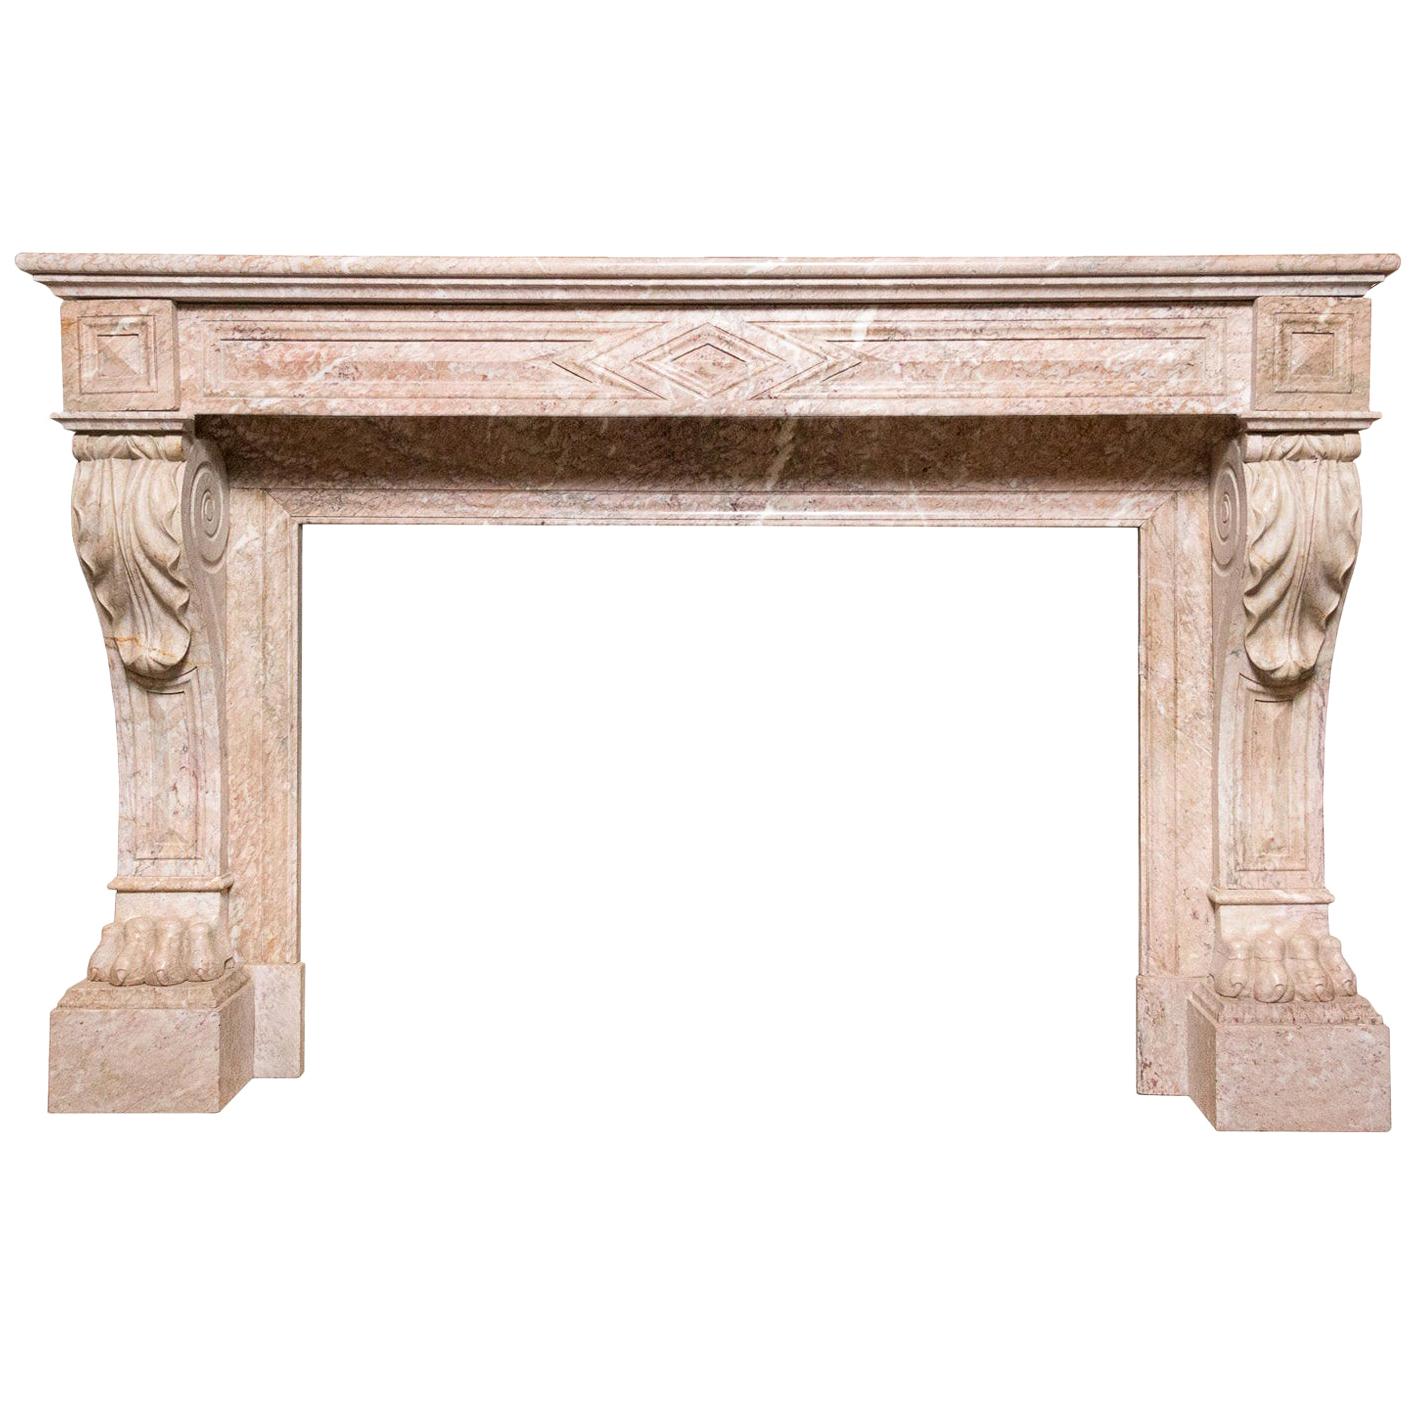 Louis Philippe Period Marble Empire Style Mantel